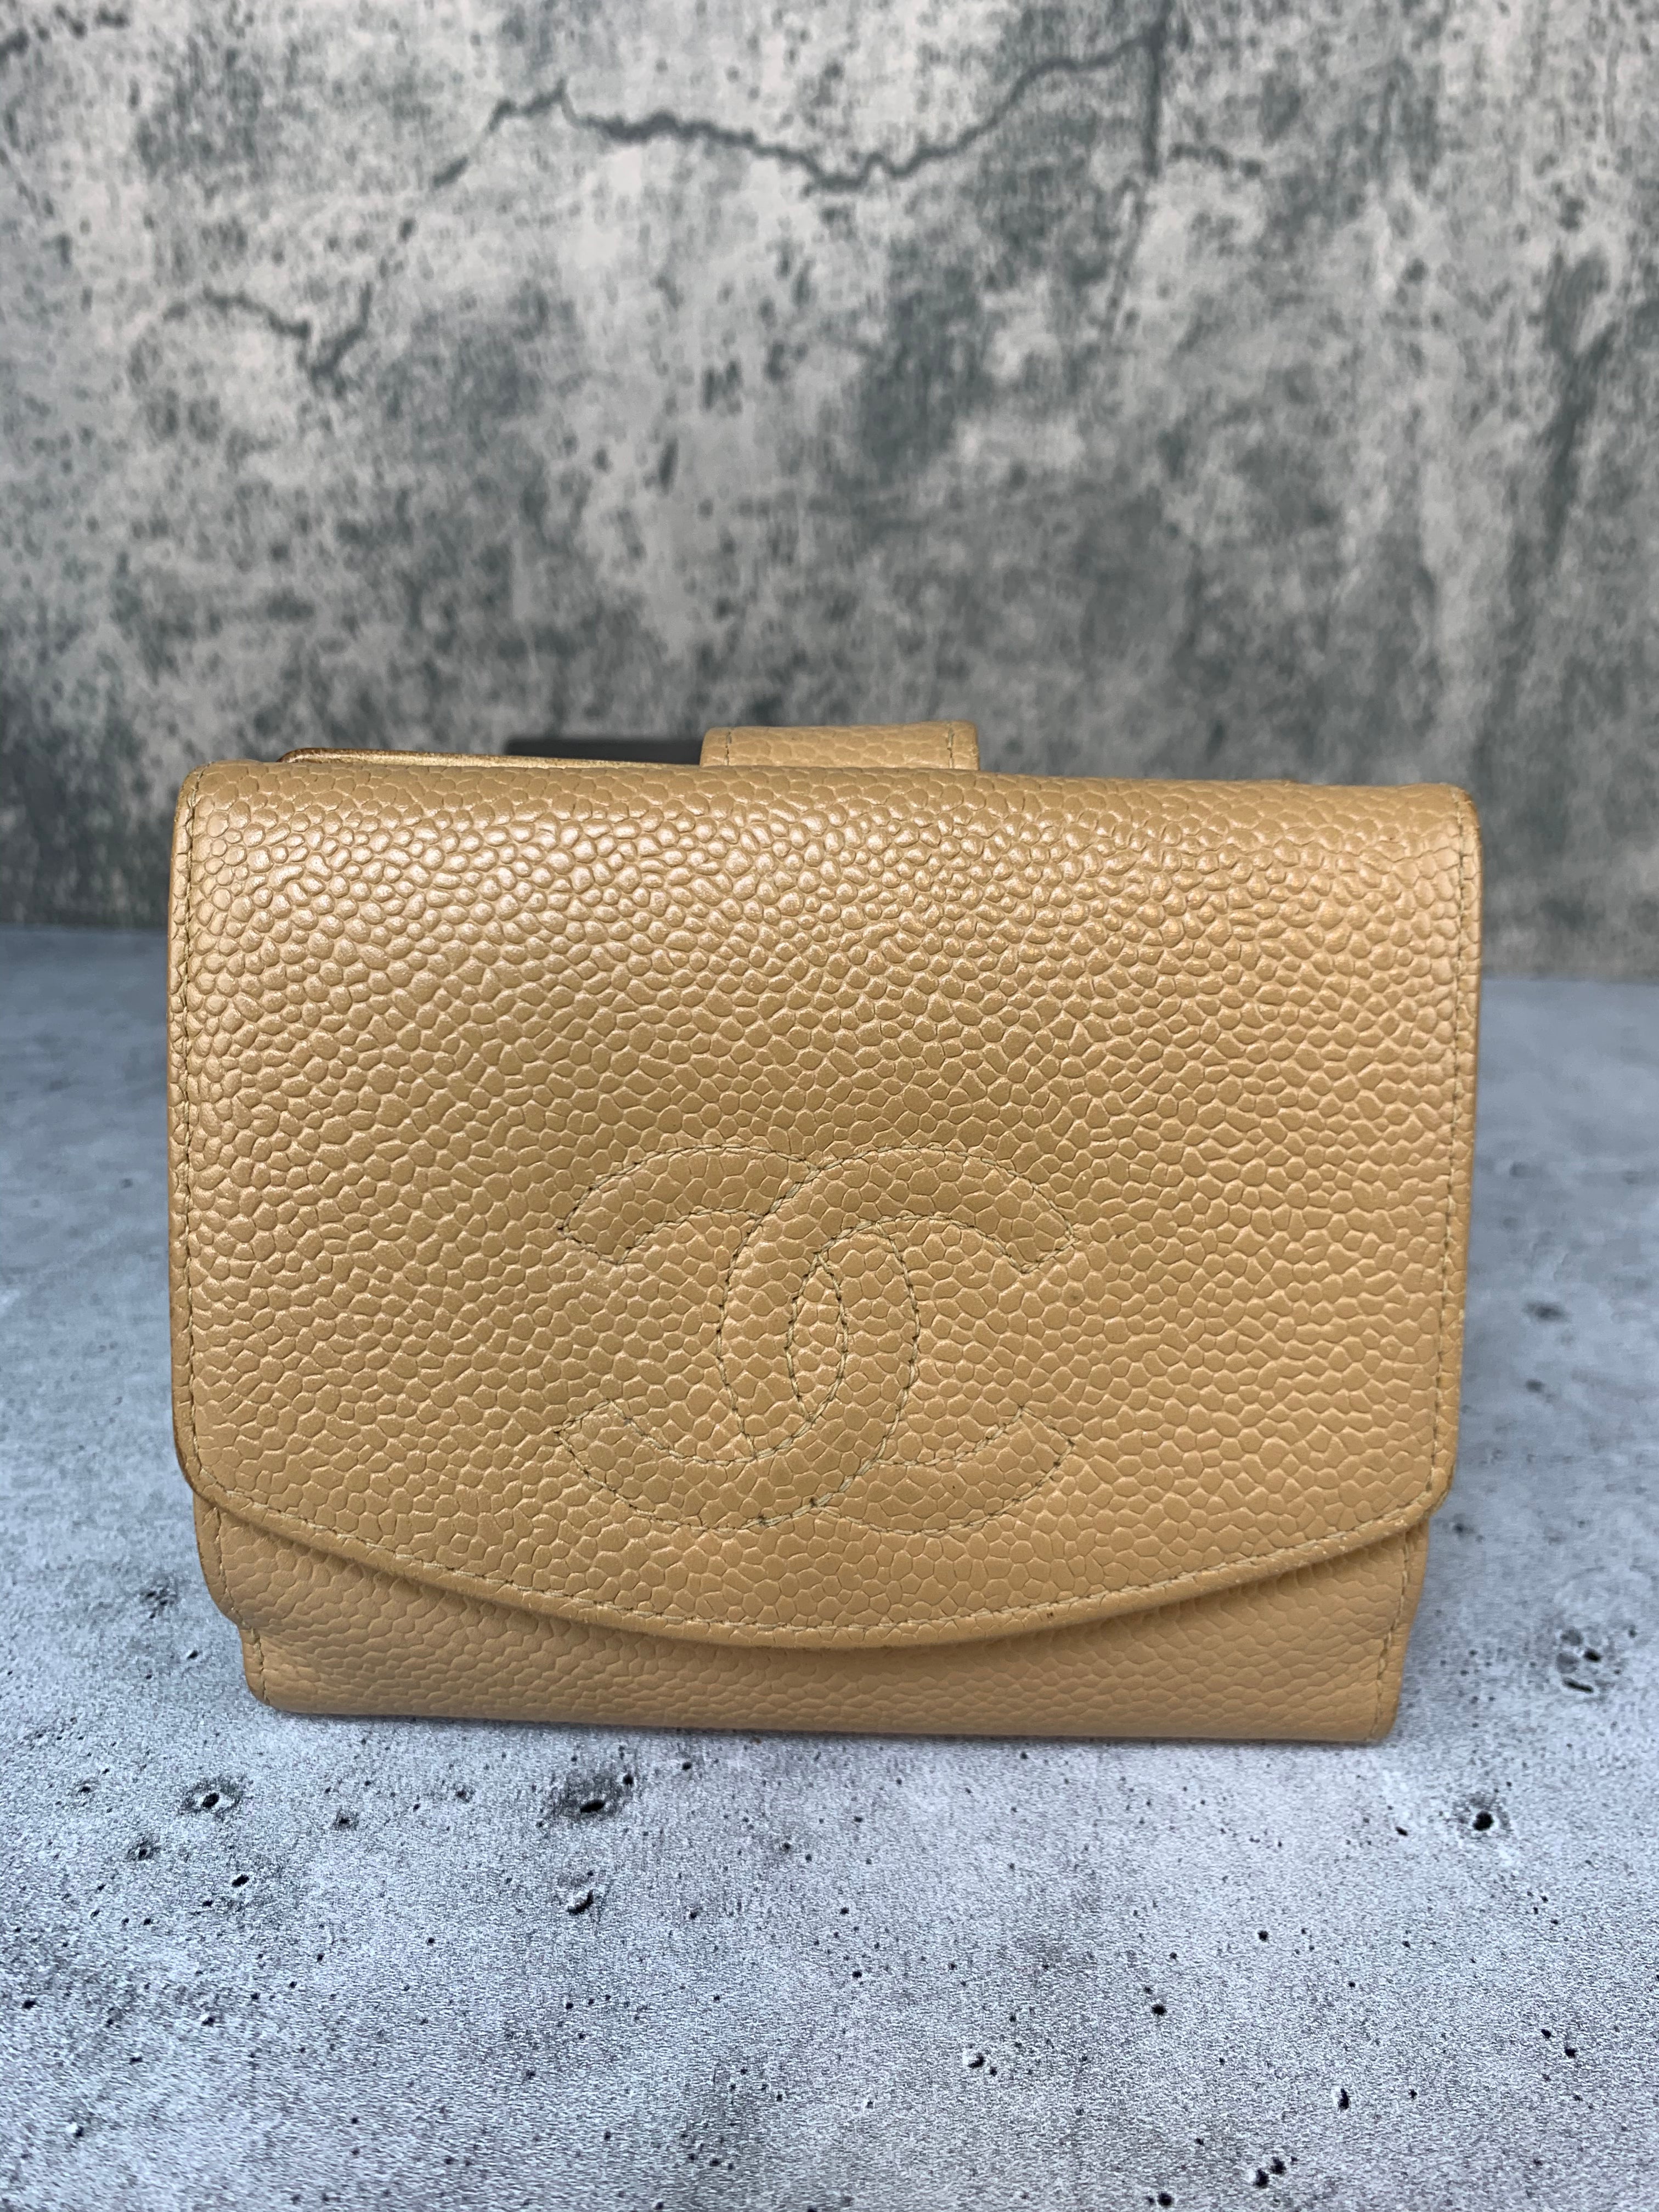 CHANEL Caviar Quilted Like A Wallet Flap Black